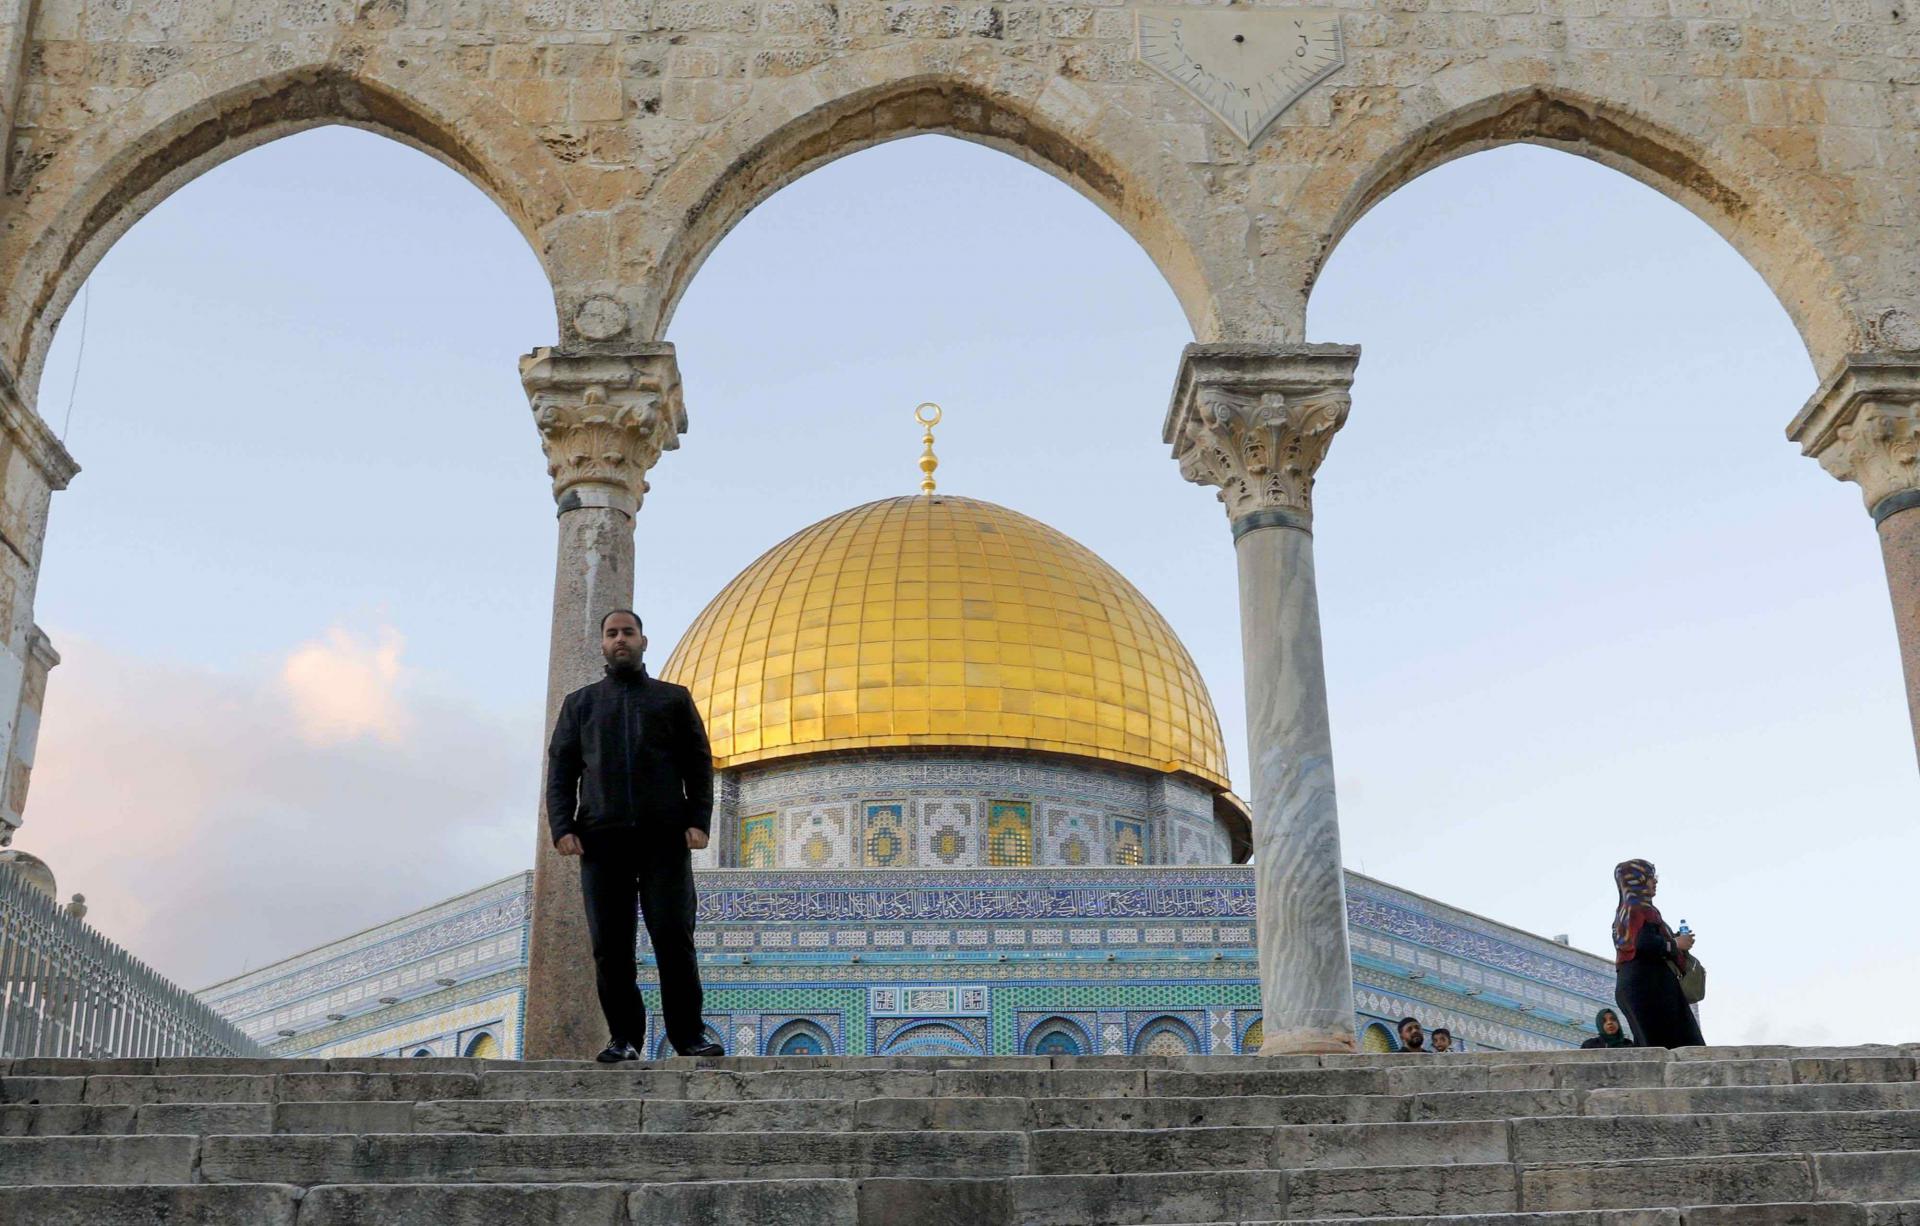 "It is an honour from God that this family has been blessed with beautiful voices to be able to call the prayer in the Al-Aqsa mosque," he said